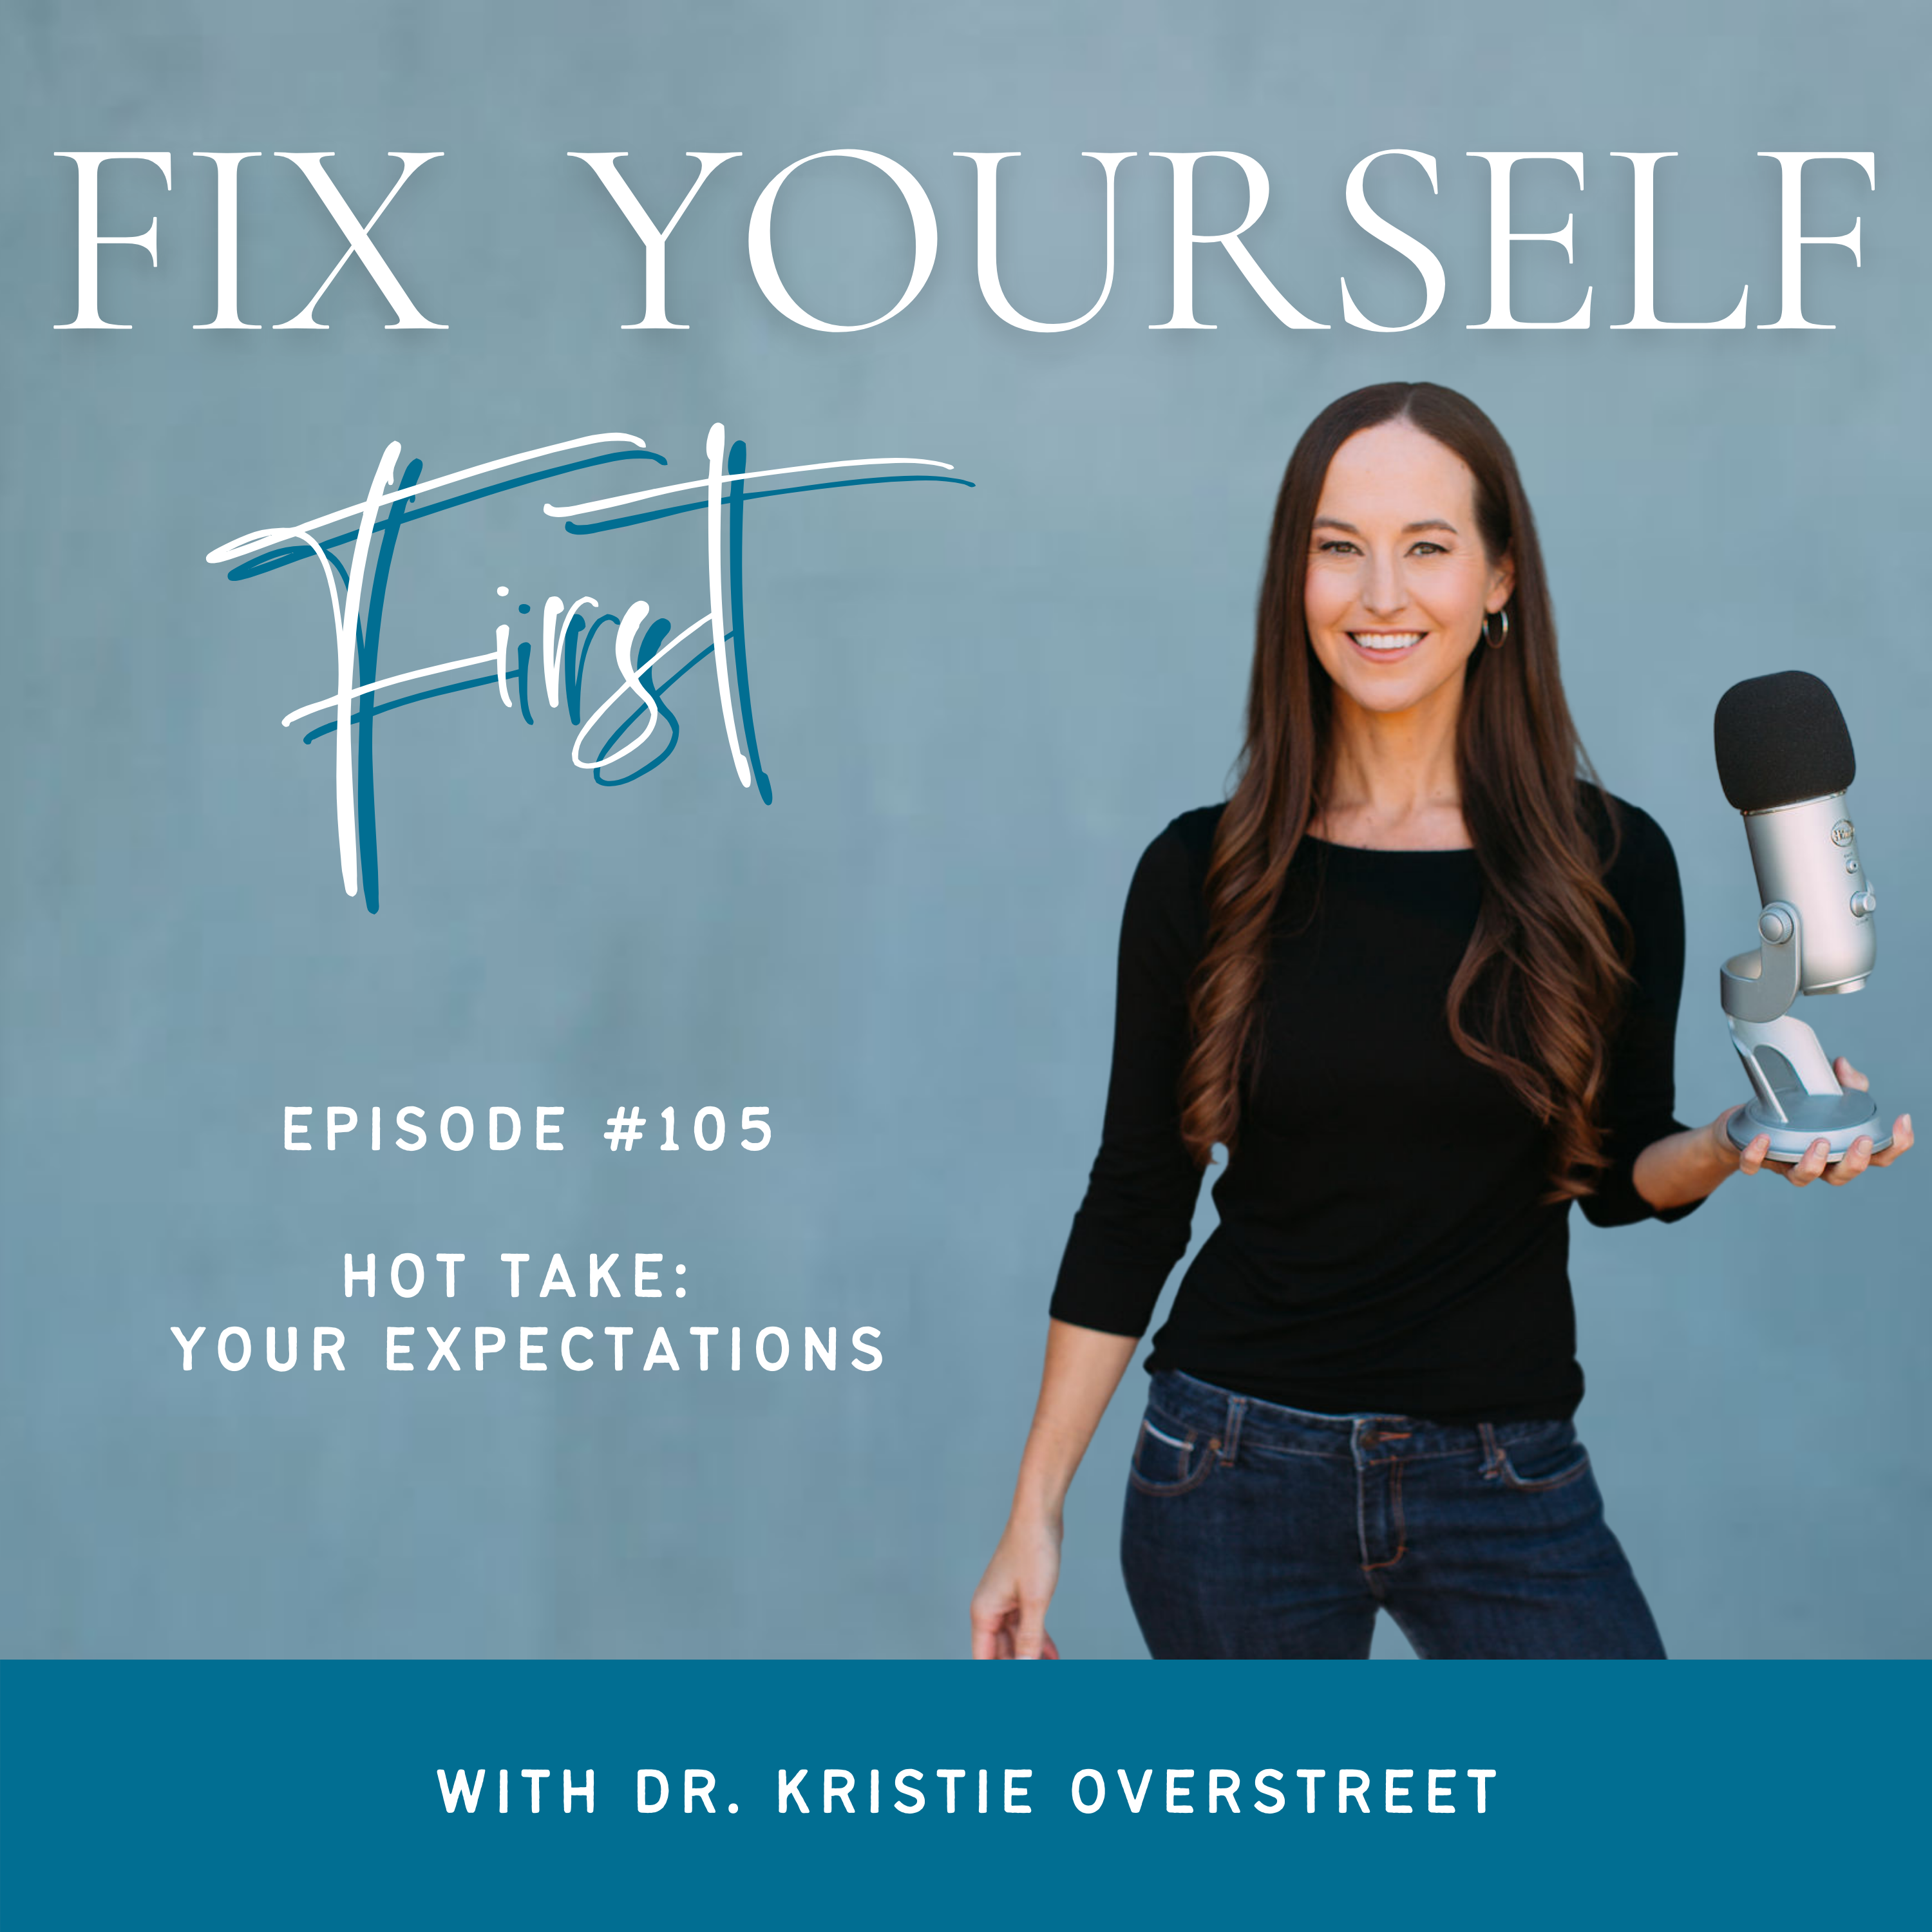 Fix Yourself First Episode 105 Hot Take: Your Expectations